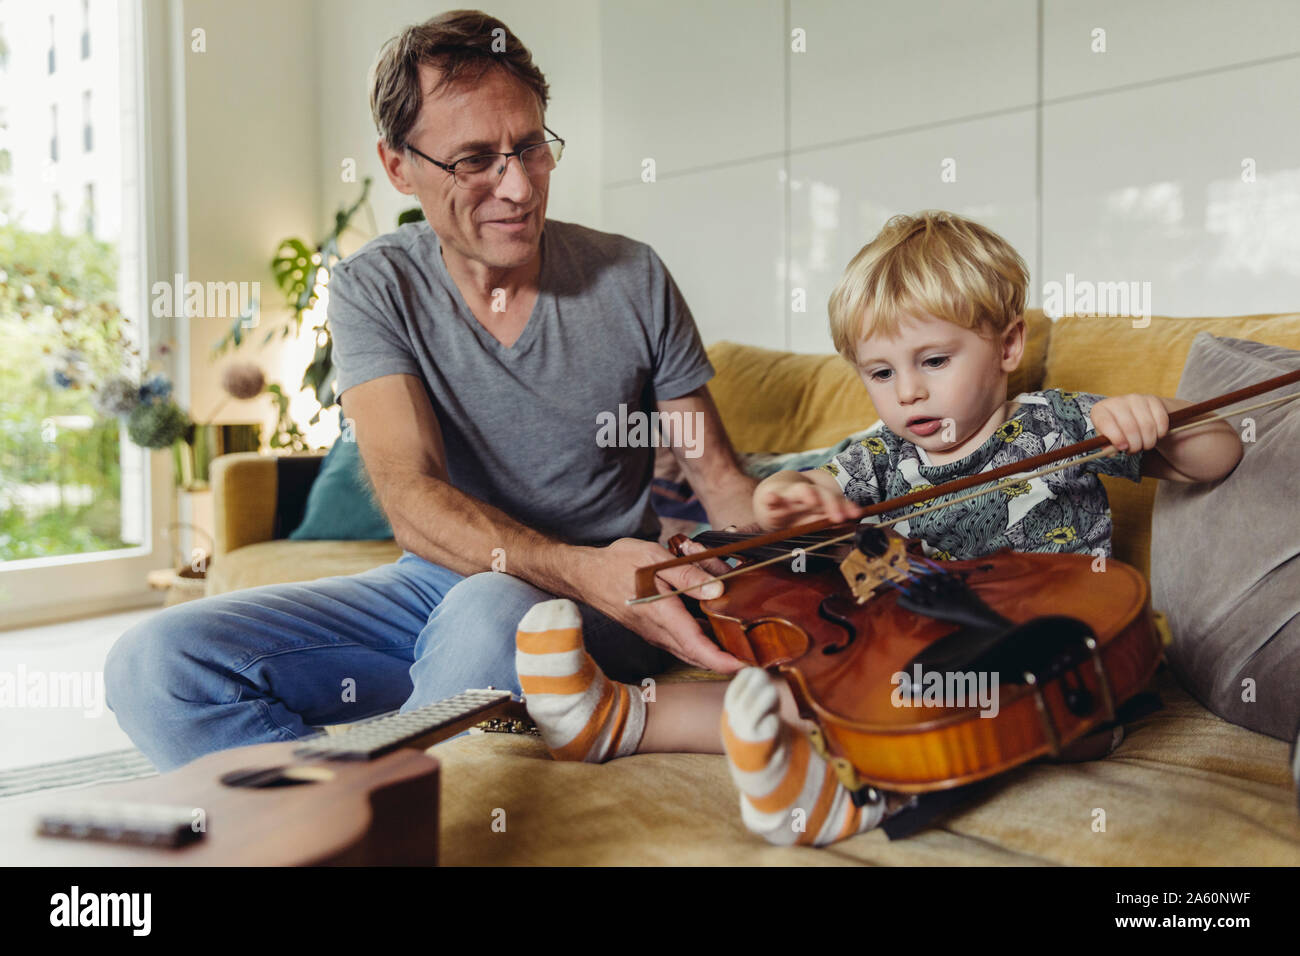 Portrait of toddler testingviolin while his father watching Stock Photo